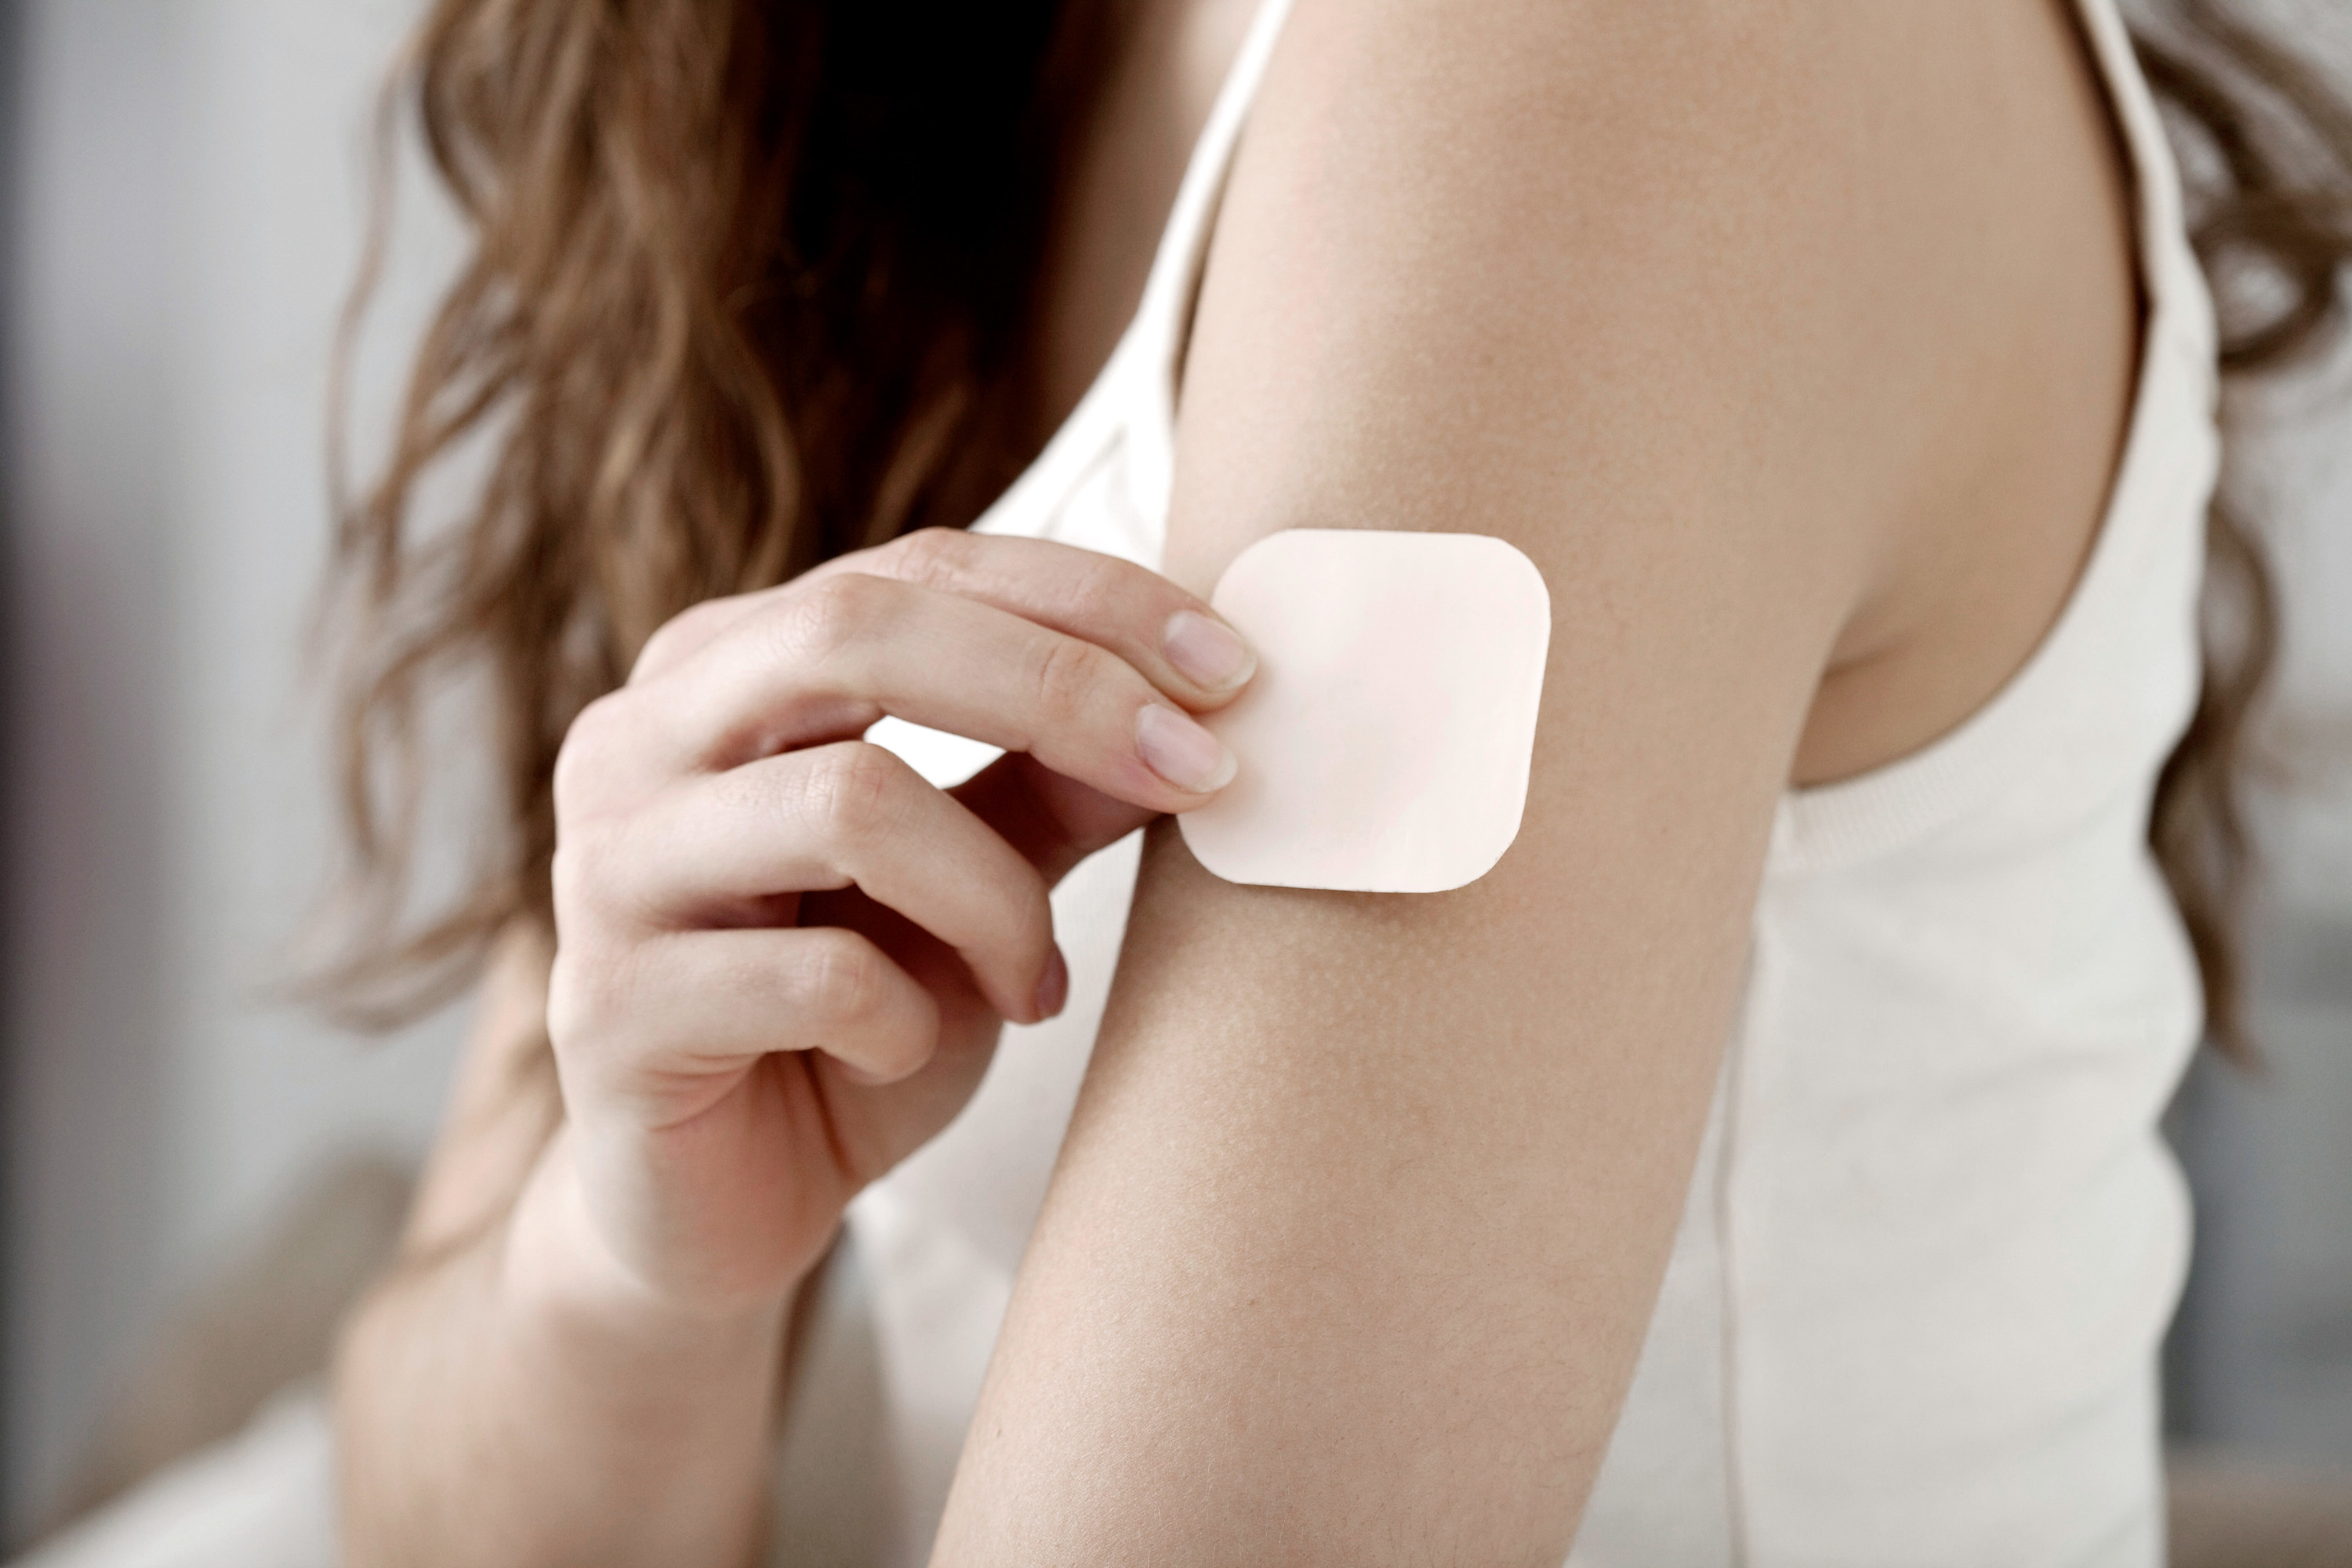 A stock image of a woman putting a birth control patch on her upper arm